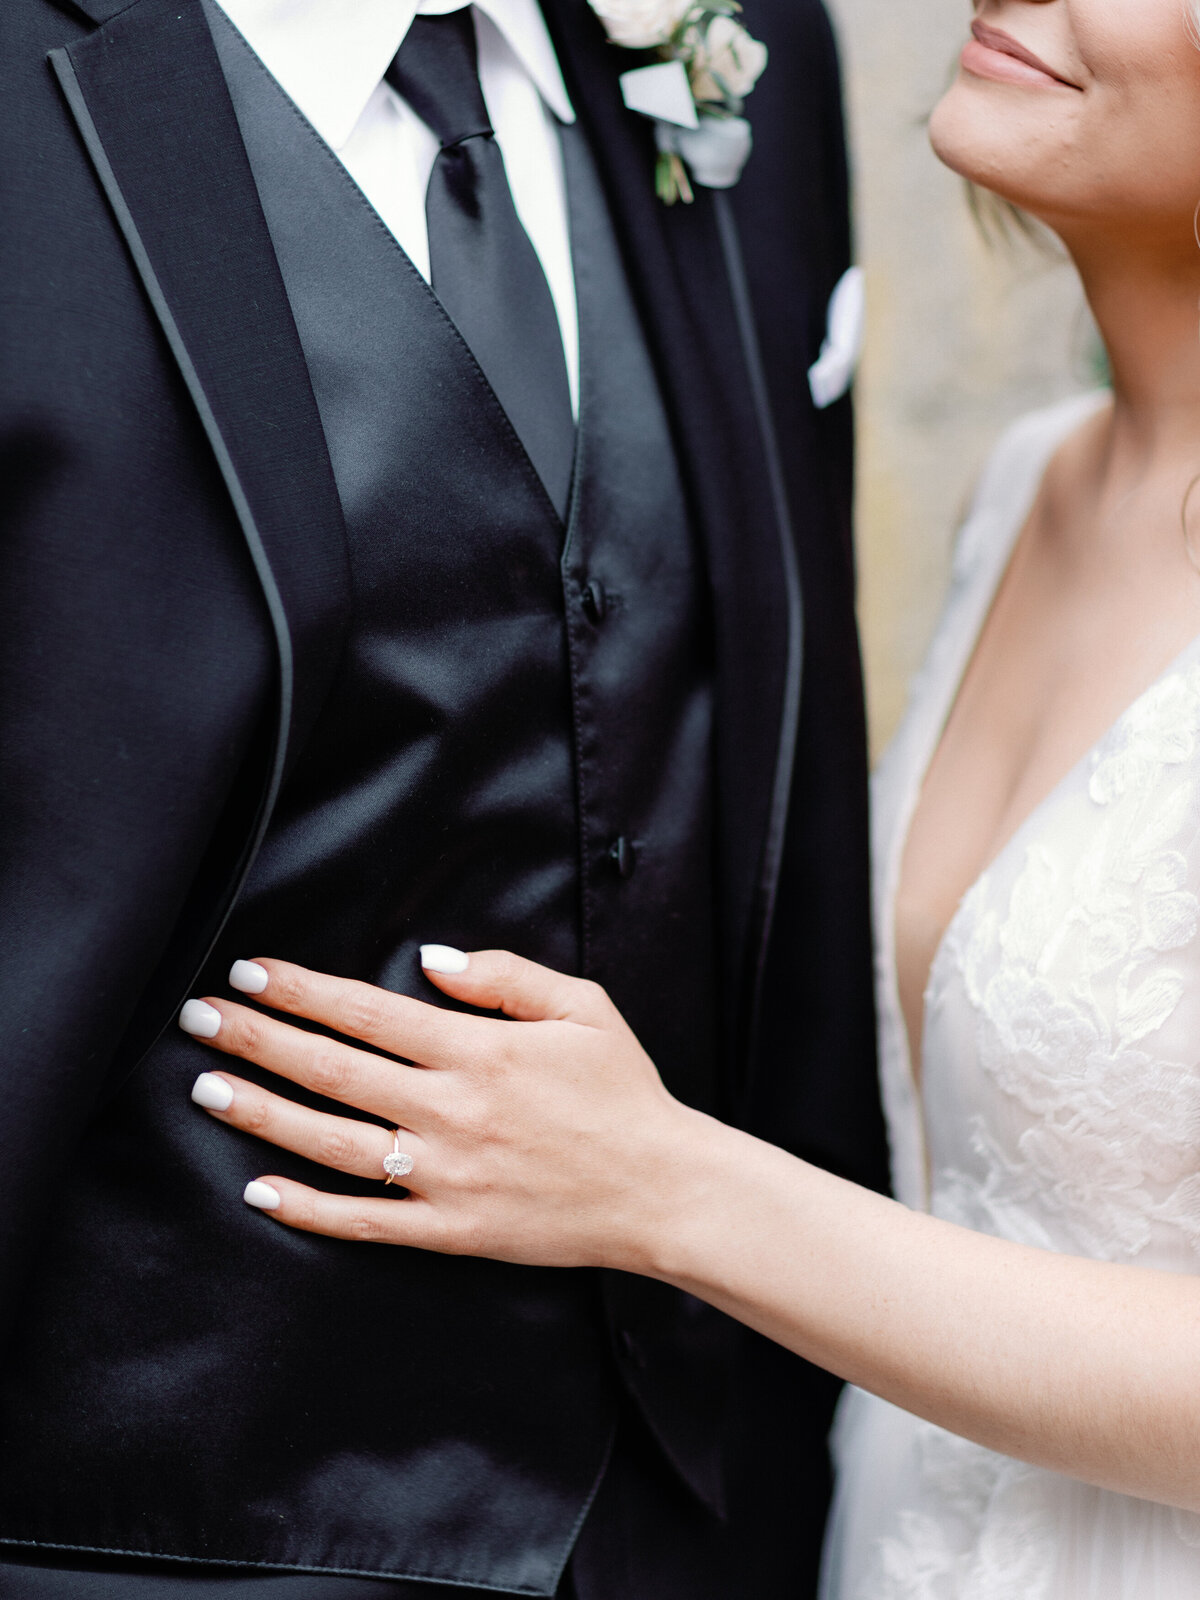 A close up of a bride's hand with her engagement ring placed on top of her groom's chest as she looks up at him